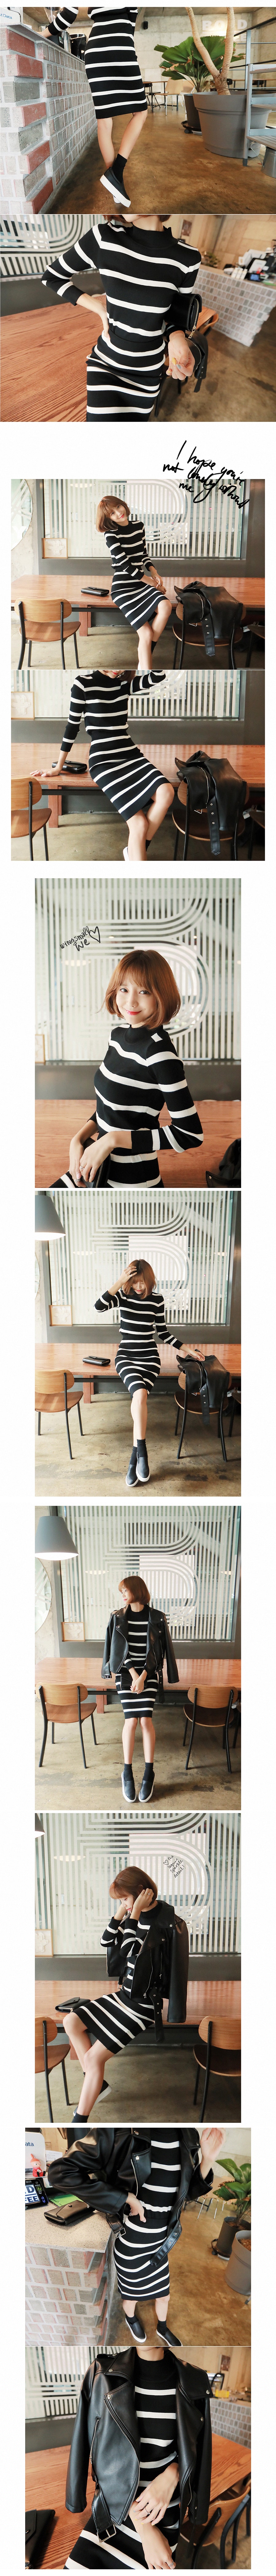 KOREA Mock Neck Striped Knit Top and +Skirt 2 Pieces Set #Black One Size(S-M) [Free Shipping]